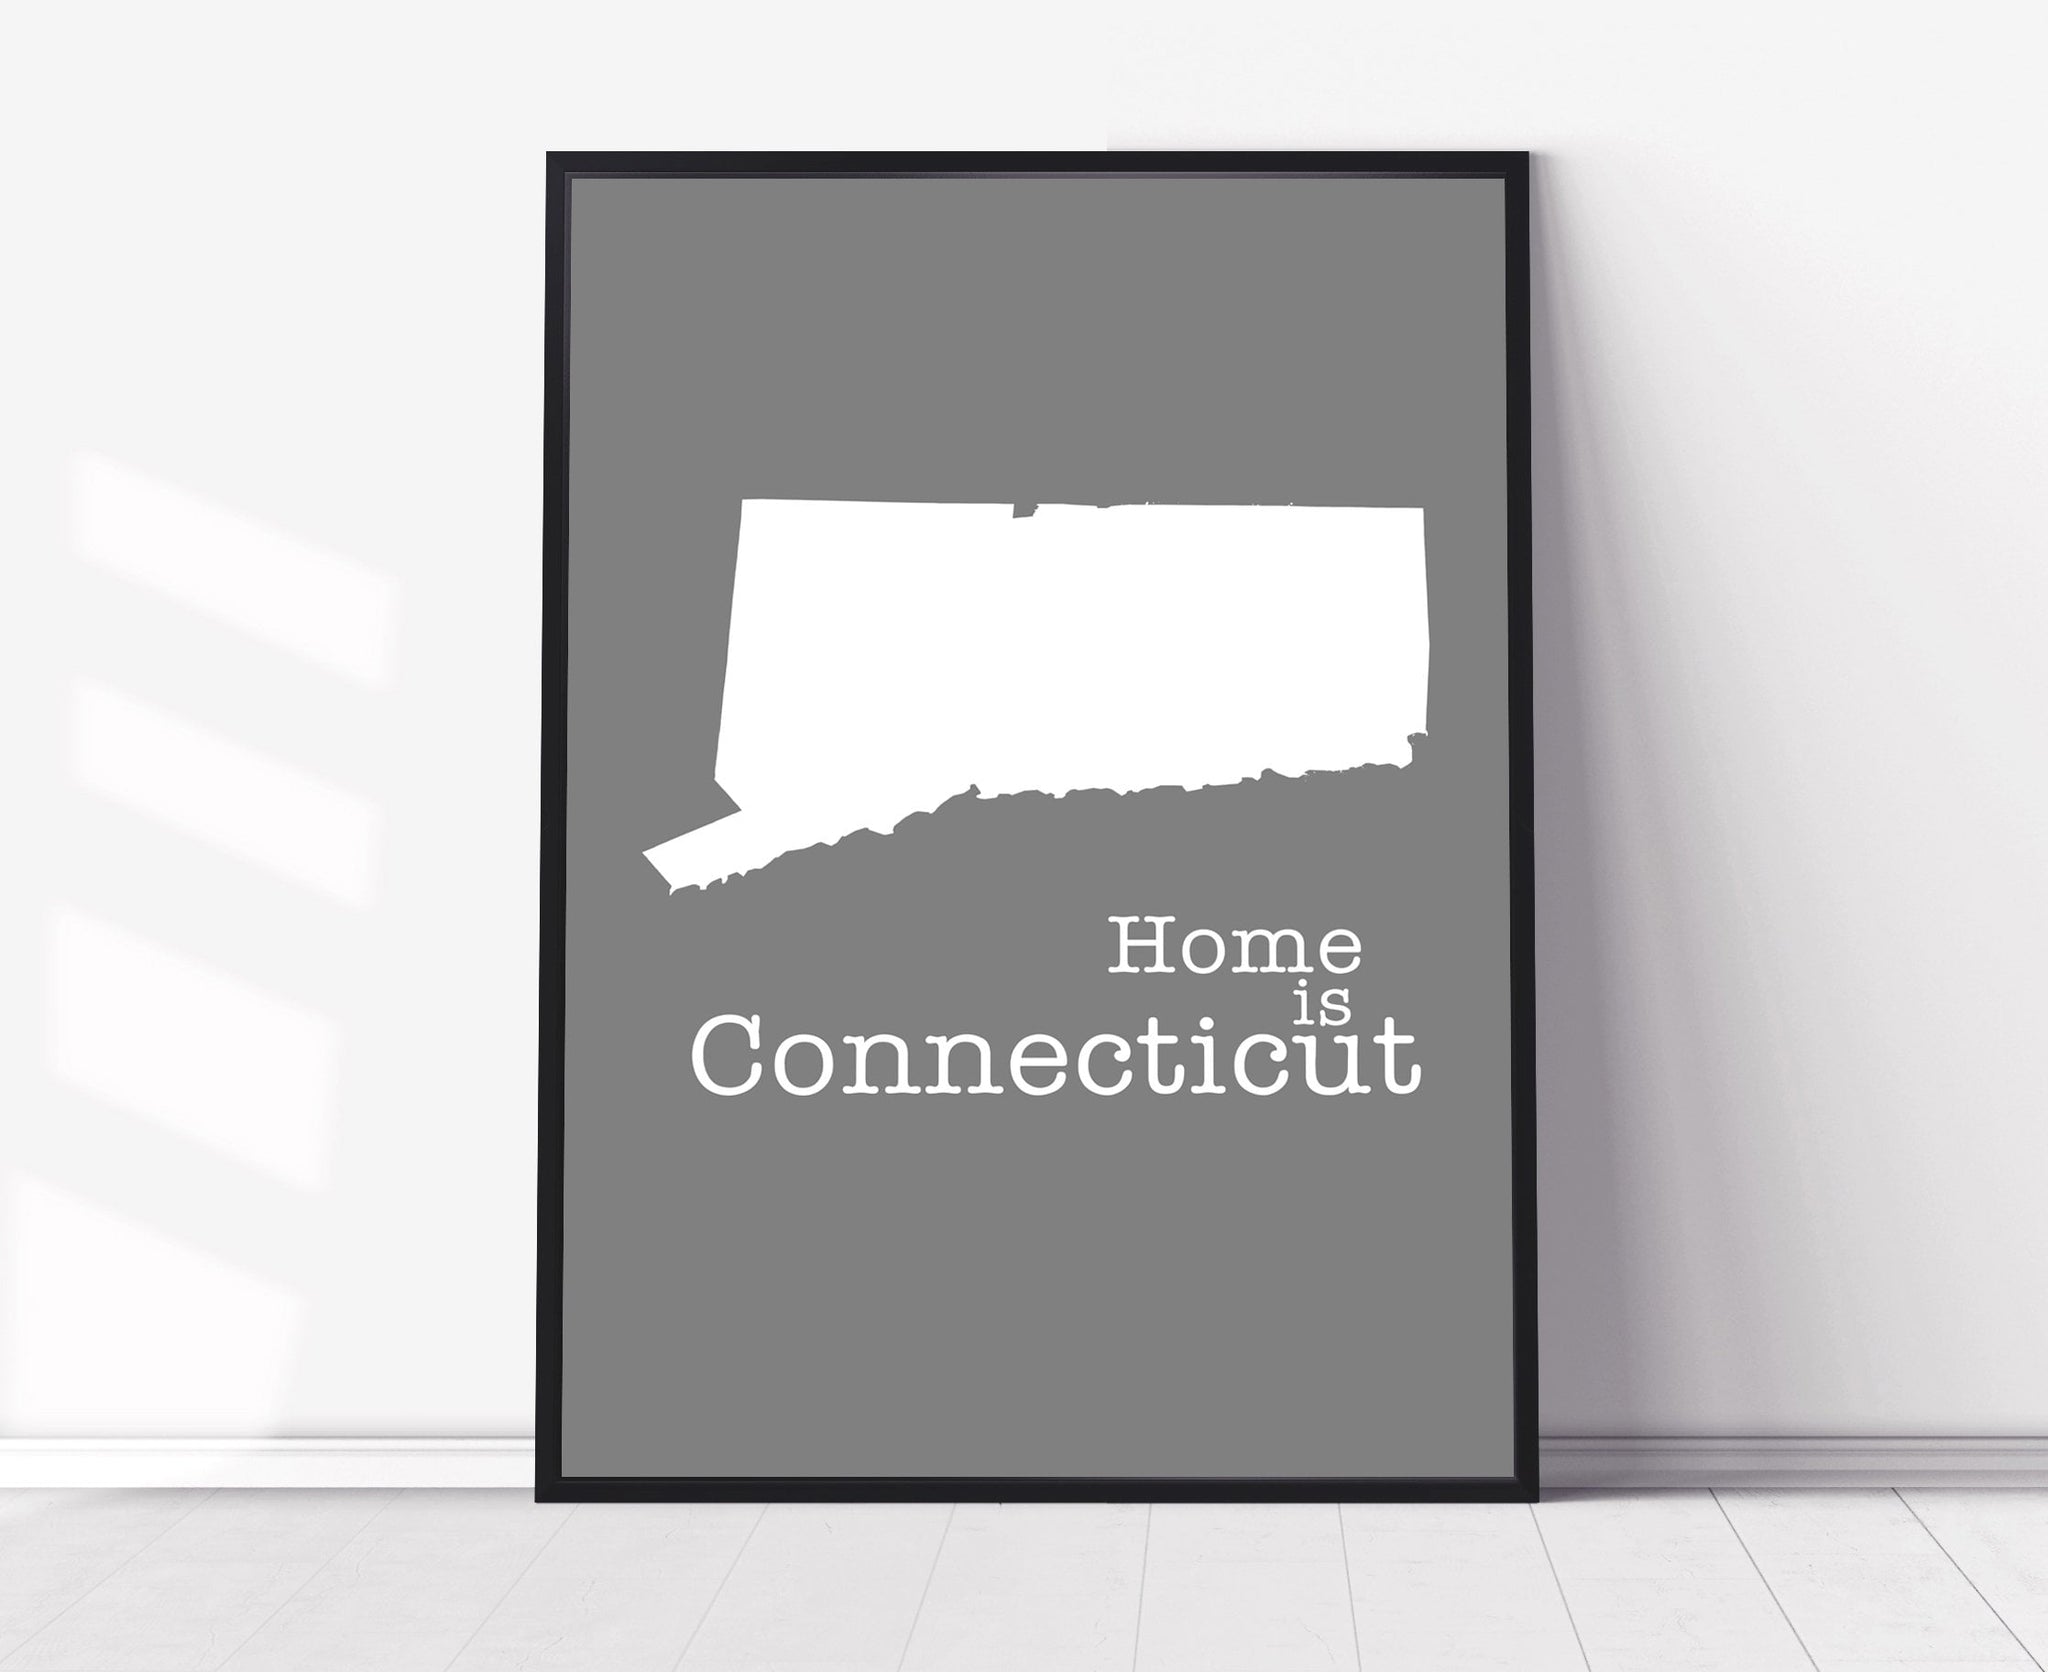 Connecticut Map Wall Art, Connecticut Map Wall Decor, City Map Poster Print, Connecticut State Poster, Home wall decor, Office wall decor